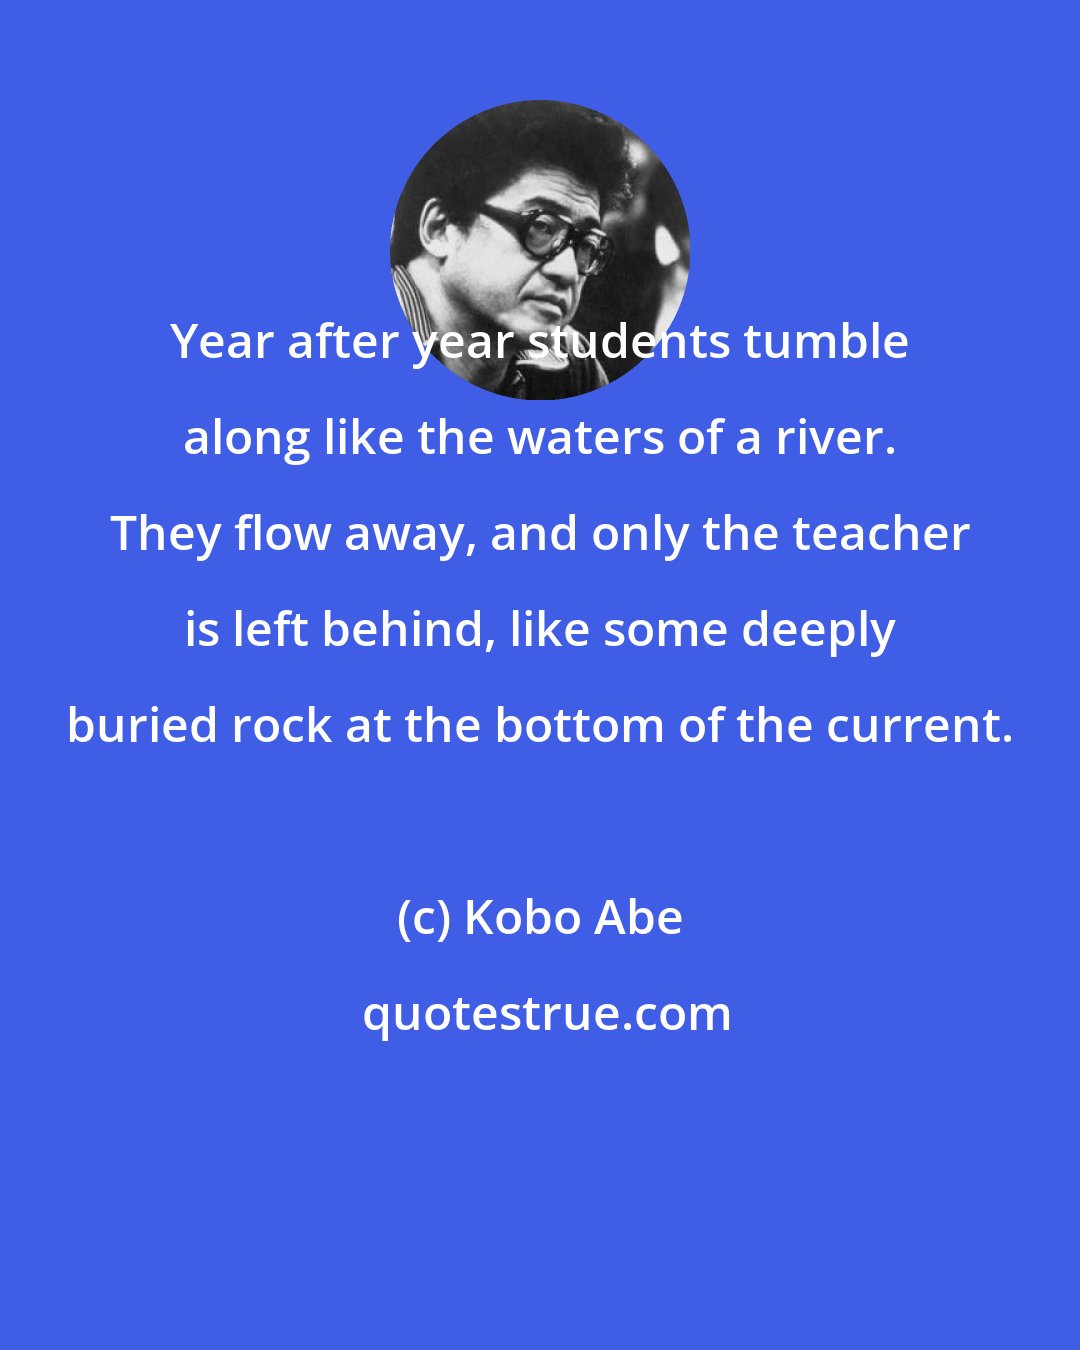 Kobo Abe: Year after year students tumble along like the waters of a river. They flow away, and only the teacher is left behind, like some deeply buried rock at the bottom of the current.